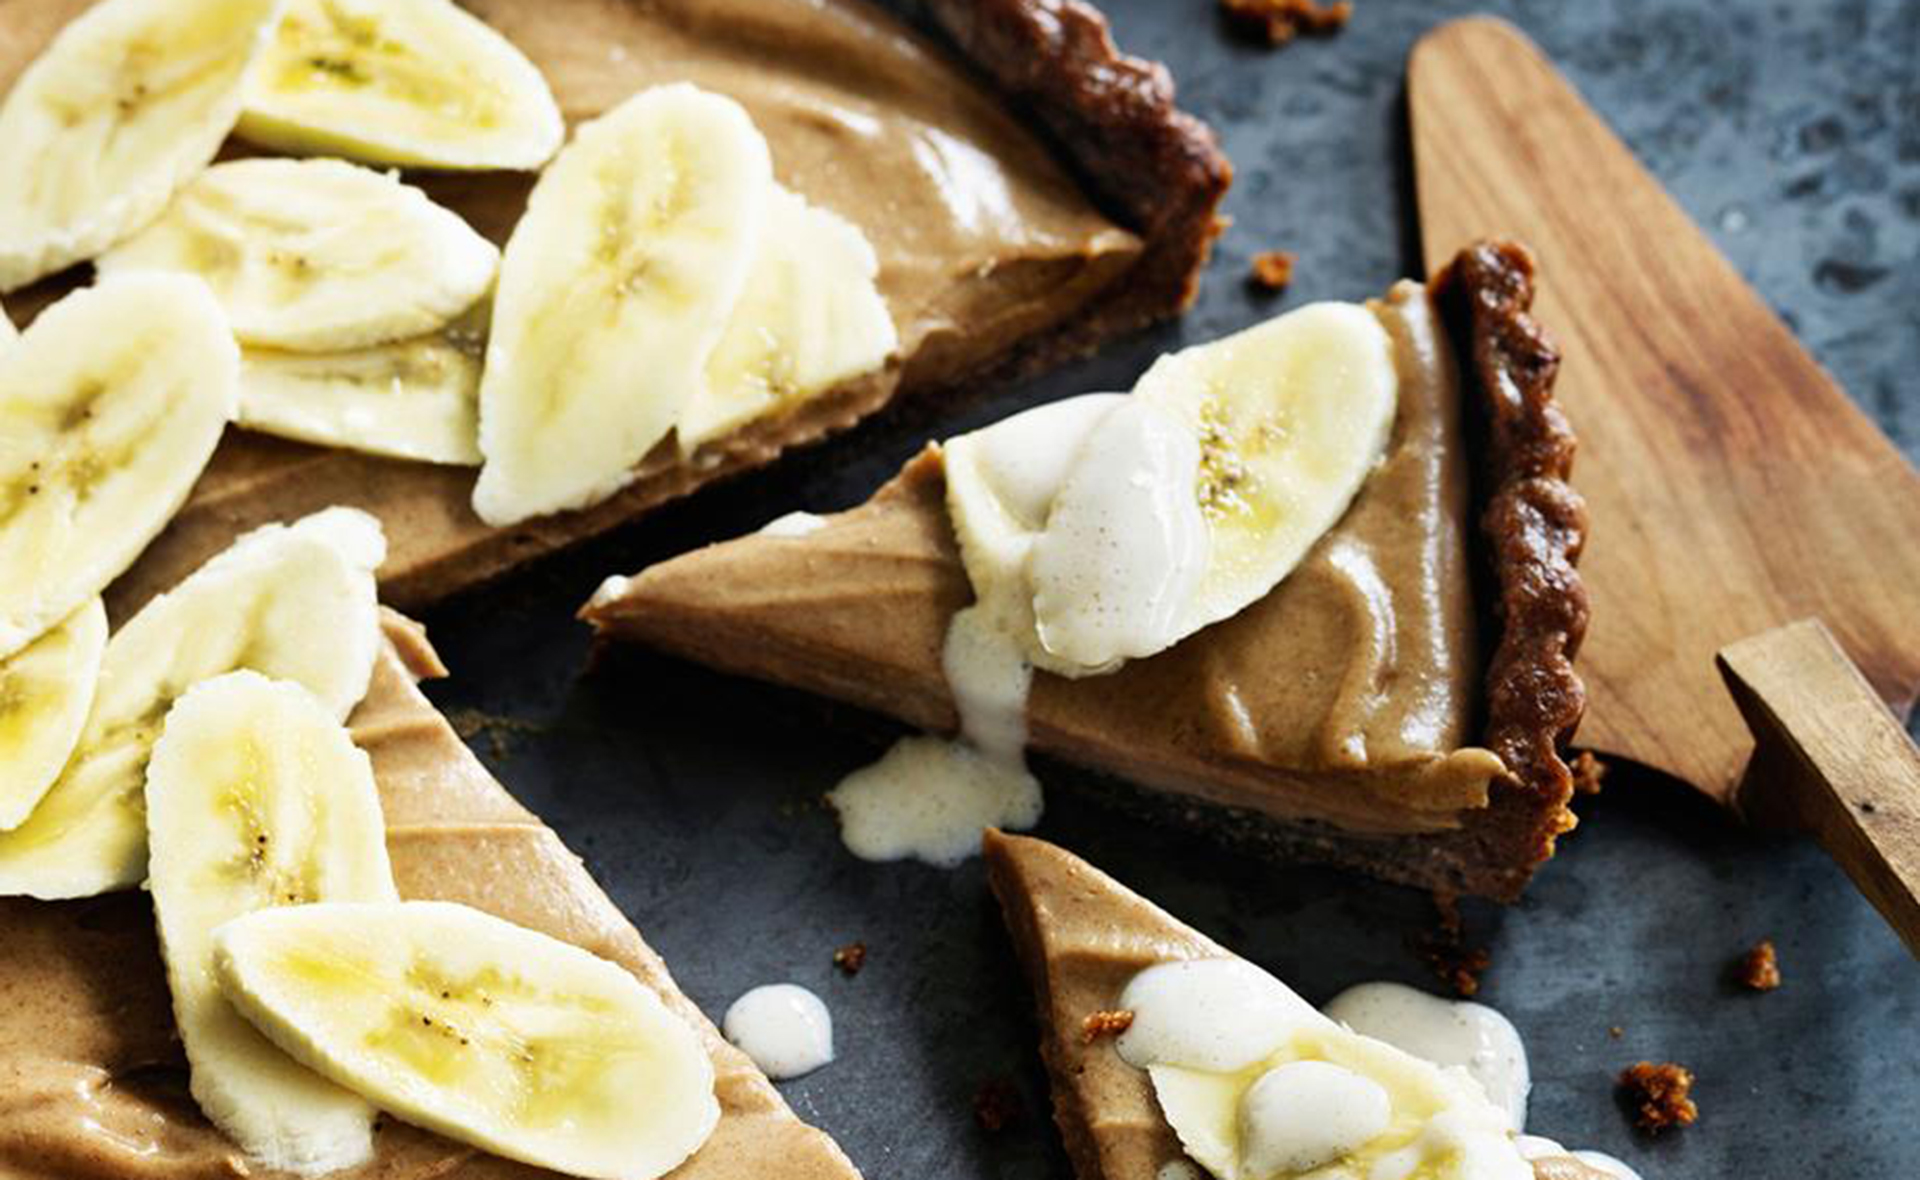 11 healthy treats you can whip up at home with just a few bananas